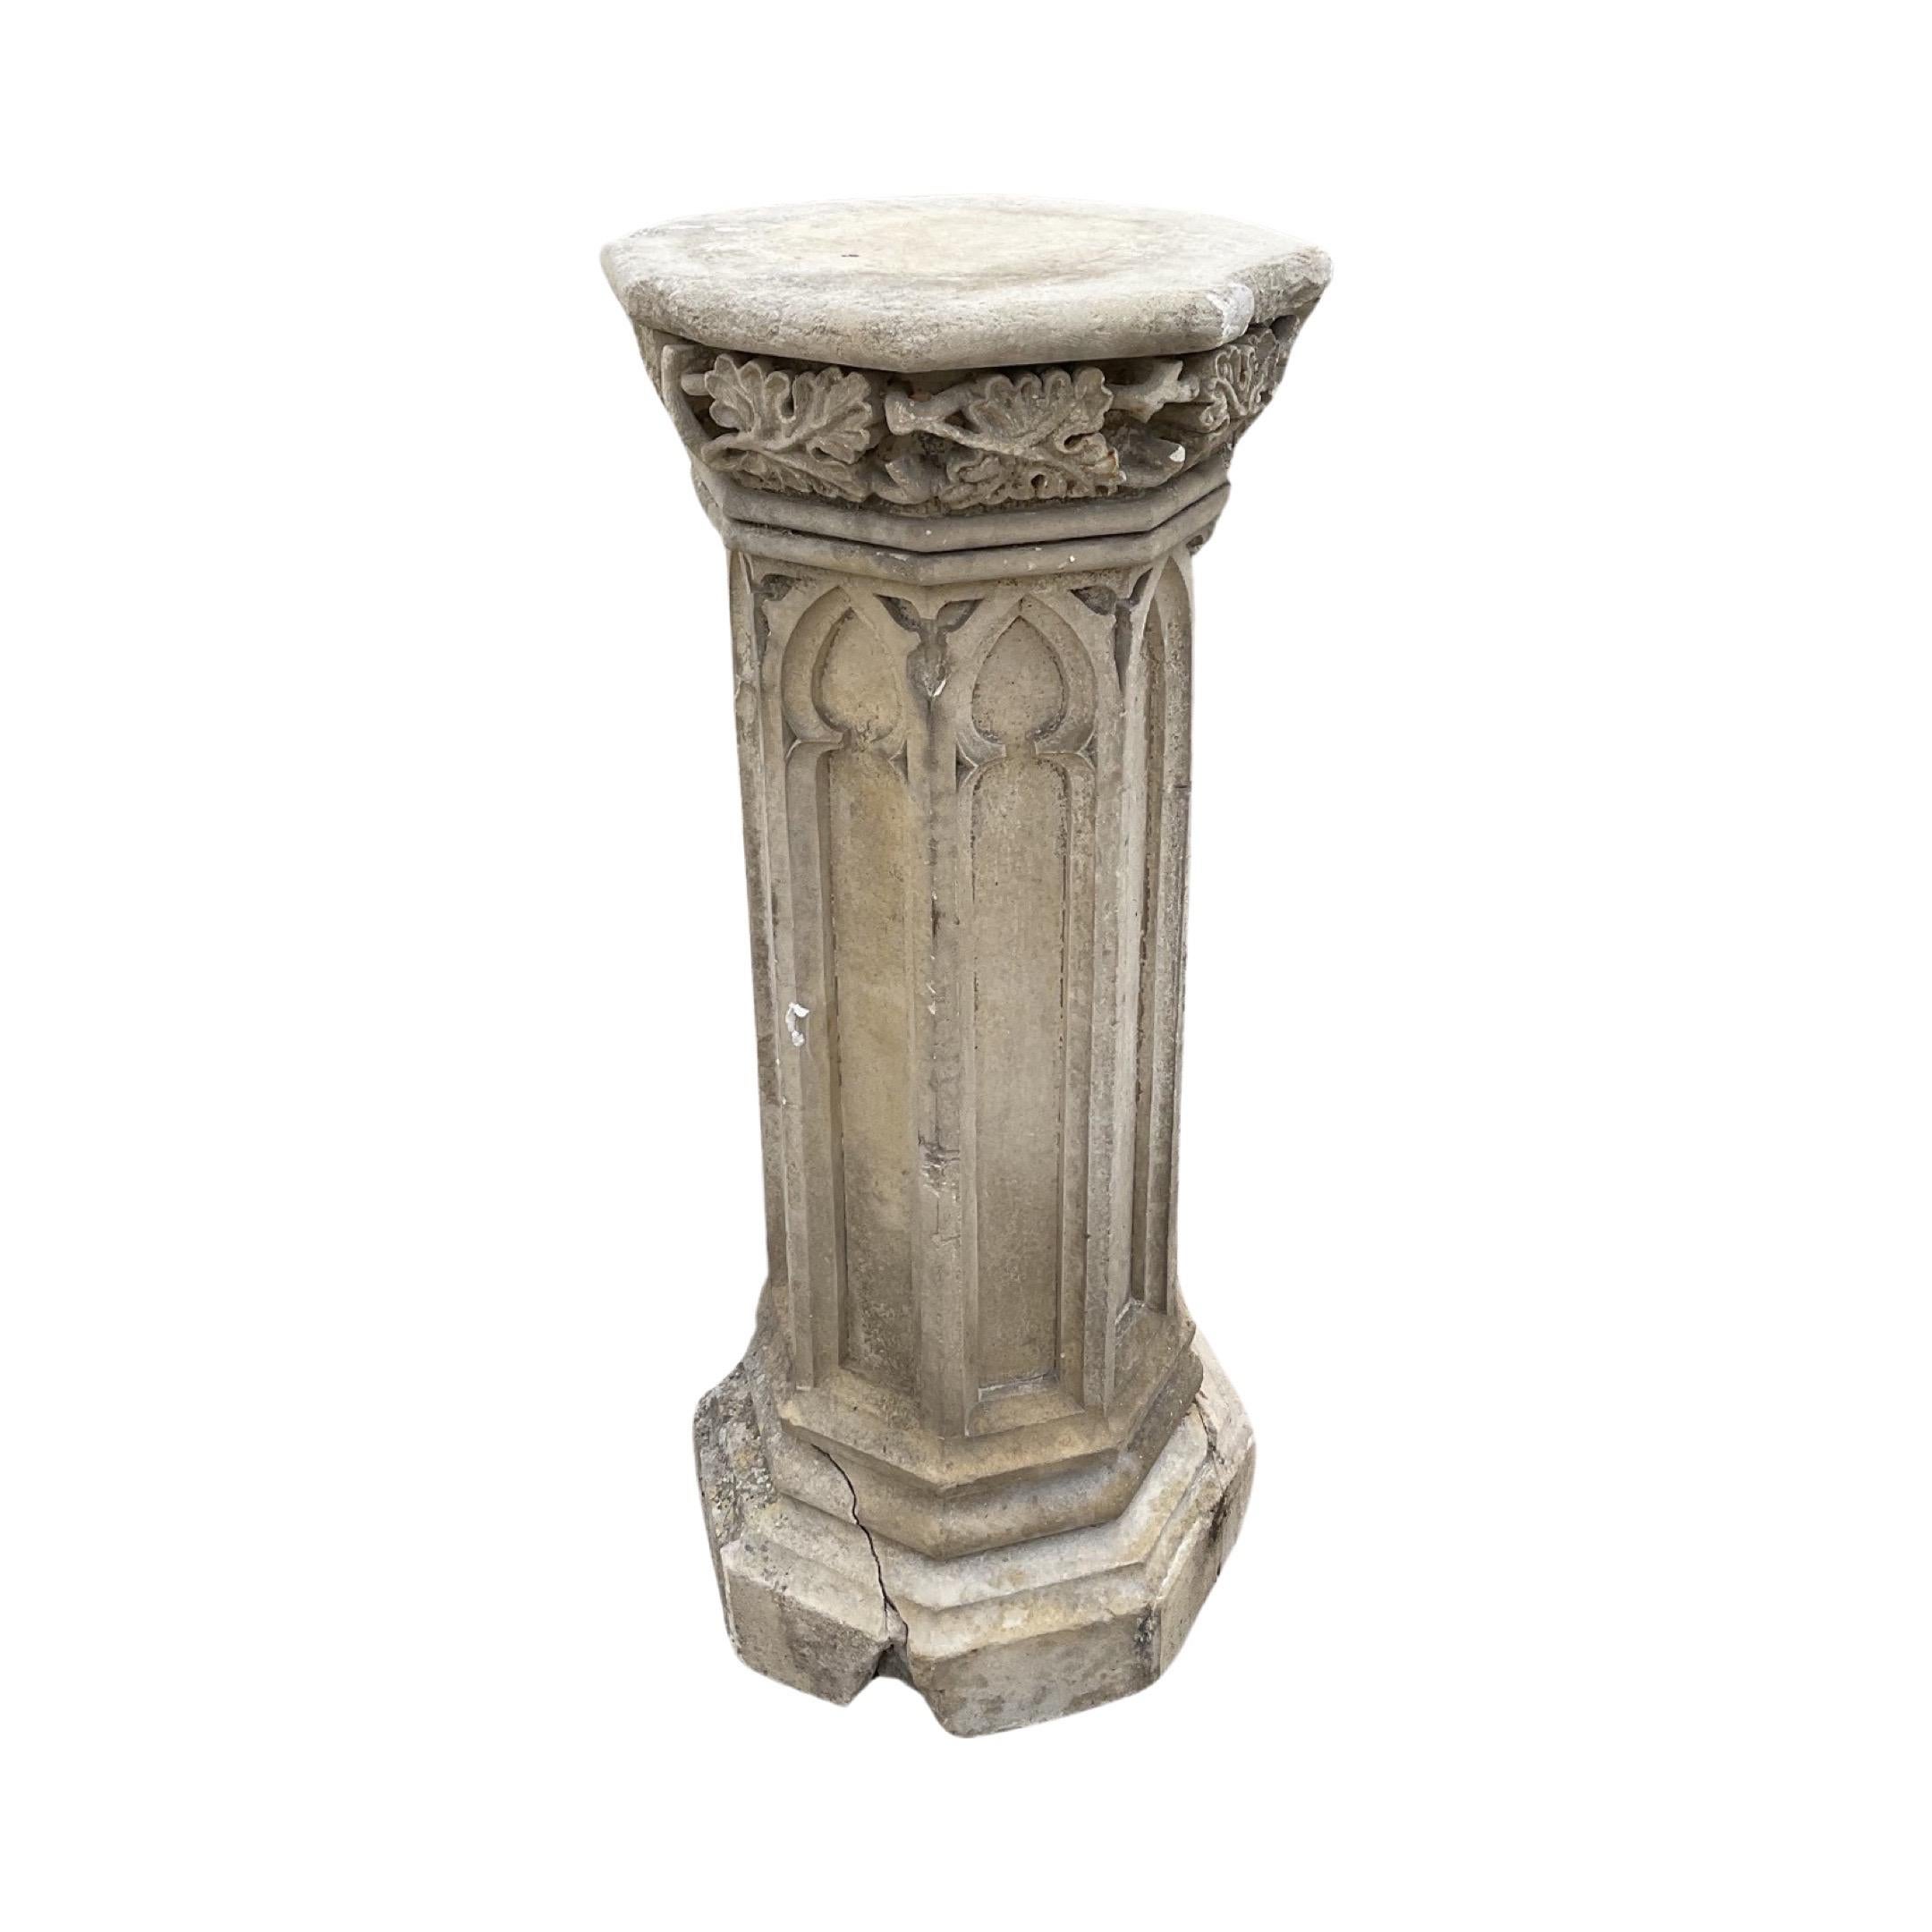 This 17th century French Limestone Pillar is a perfect addition to any outdoor garden space. Its gothic style carvings and overall design make it an eye-catching piece that can be used as a base for other elements. Crafted from durable limestone and